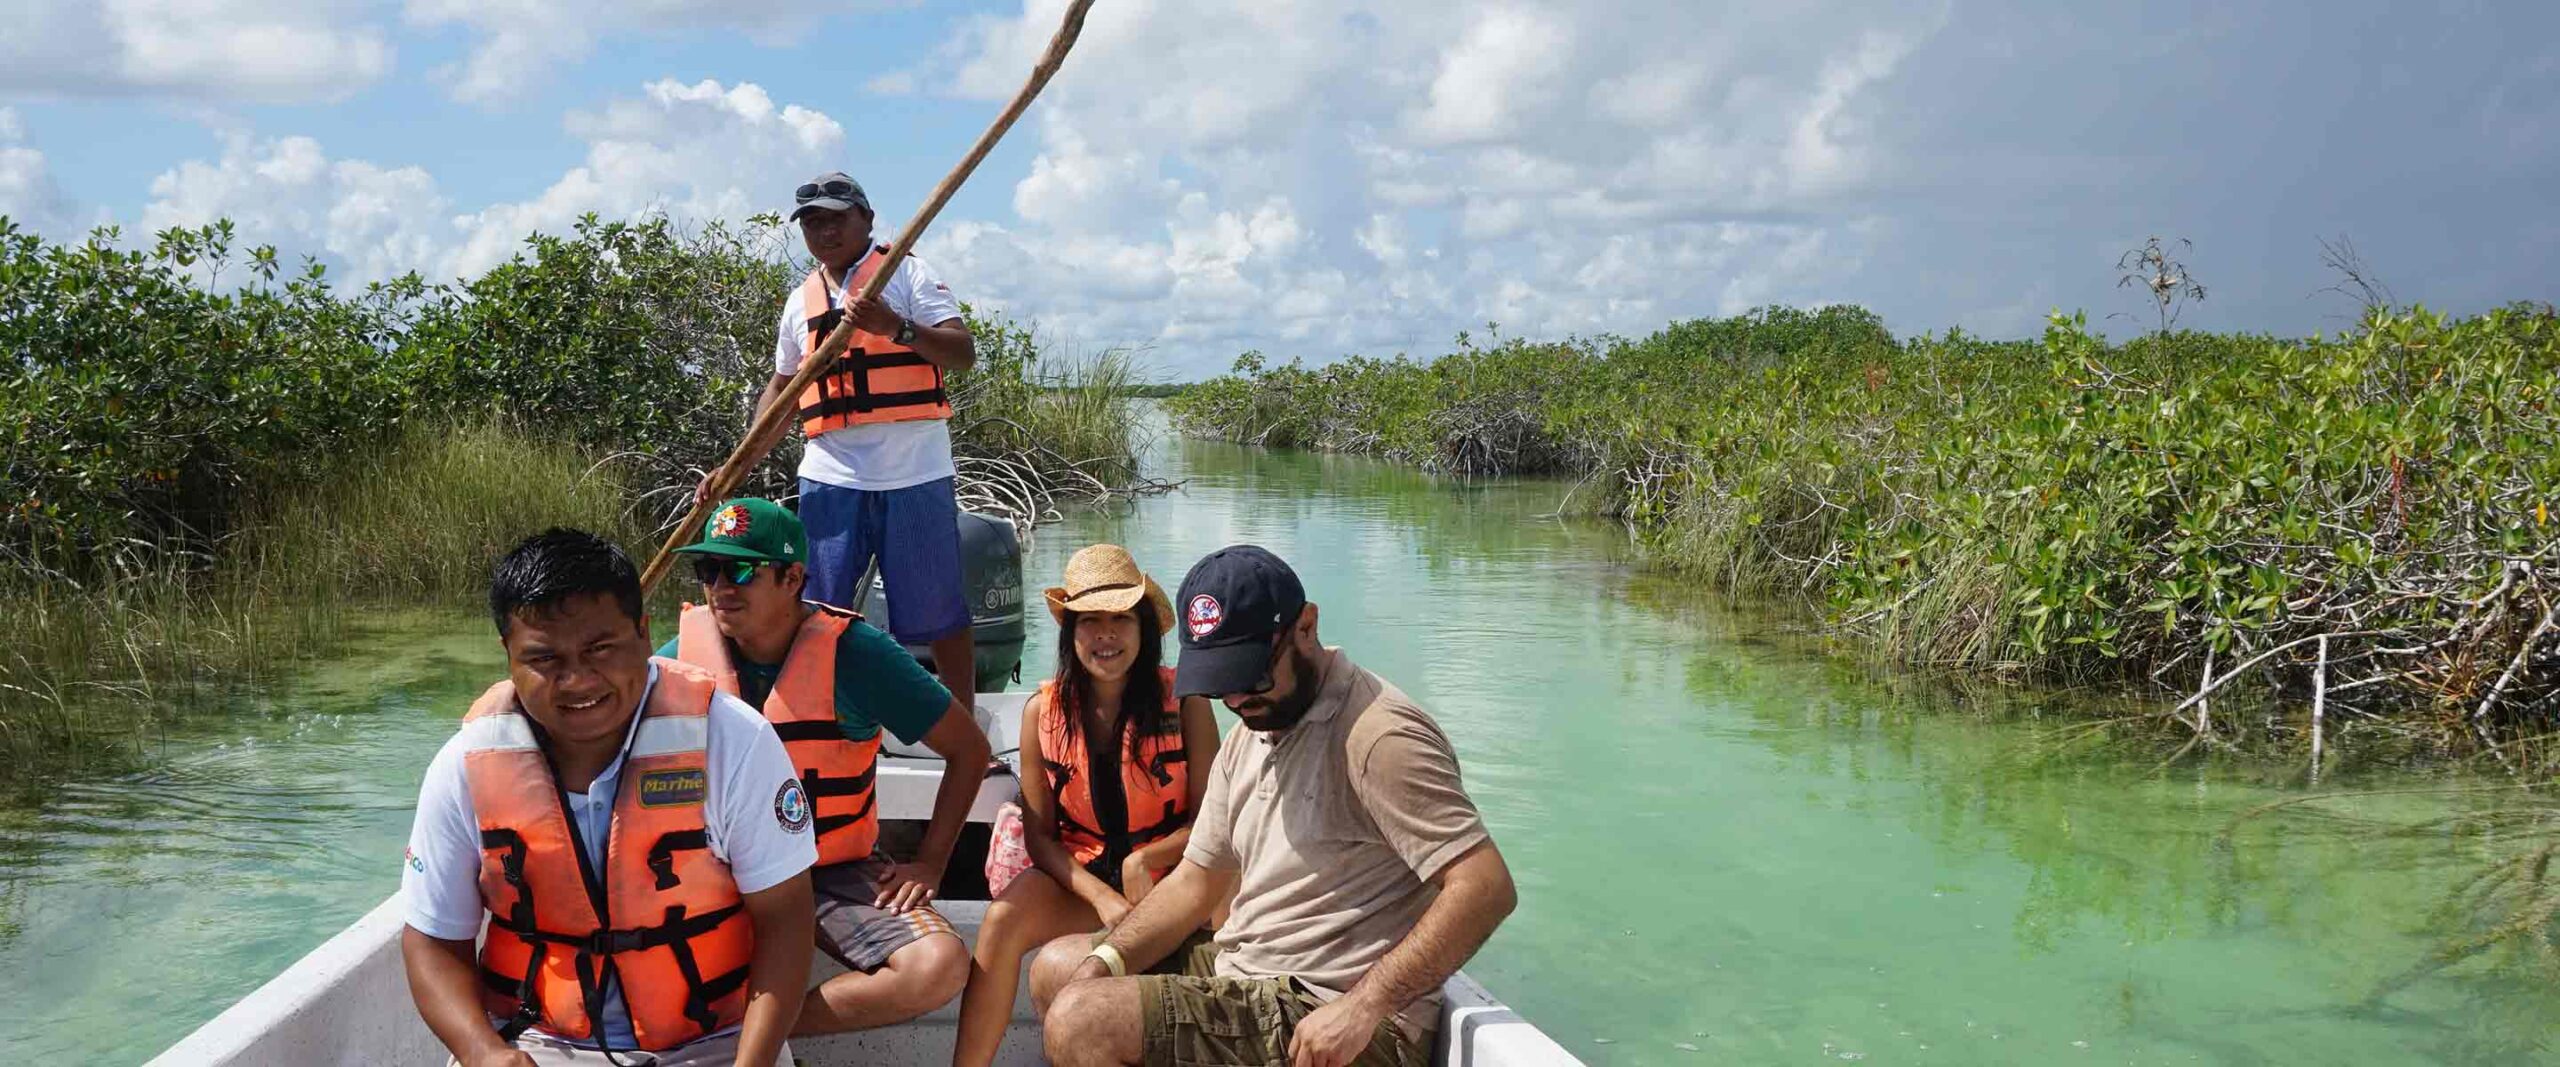 Community-based tour inside Sian Ka'an Biosphere Reserve in Mexico